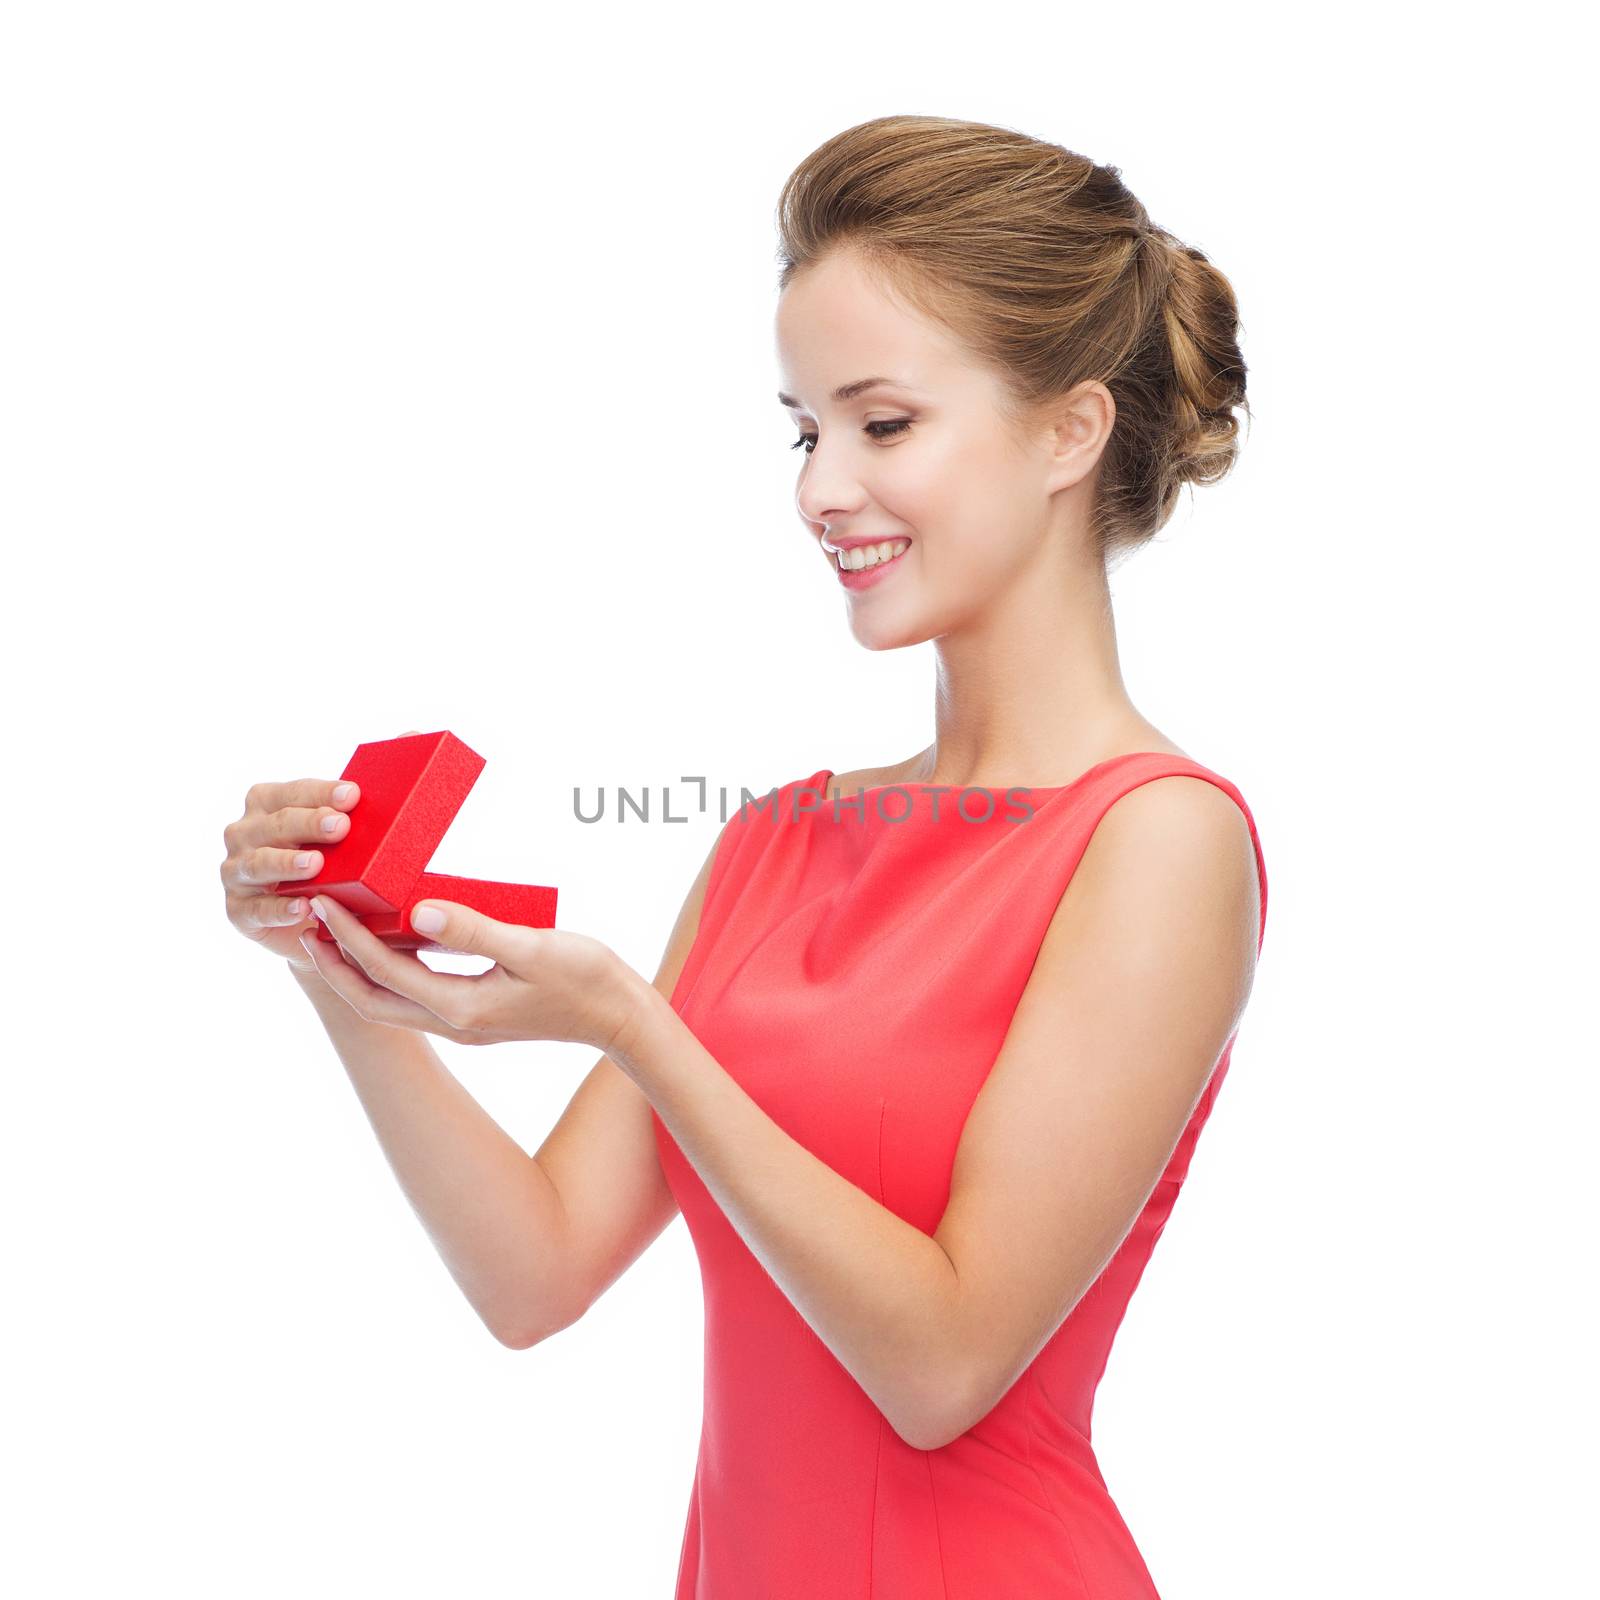 christmas, holiday, valentine's day and celebration concept - smiling young woman in red dress with gift box